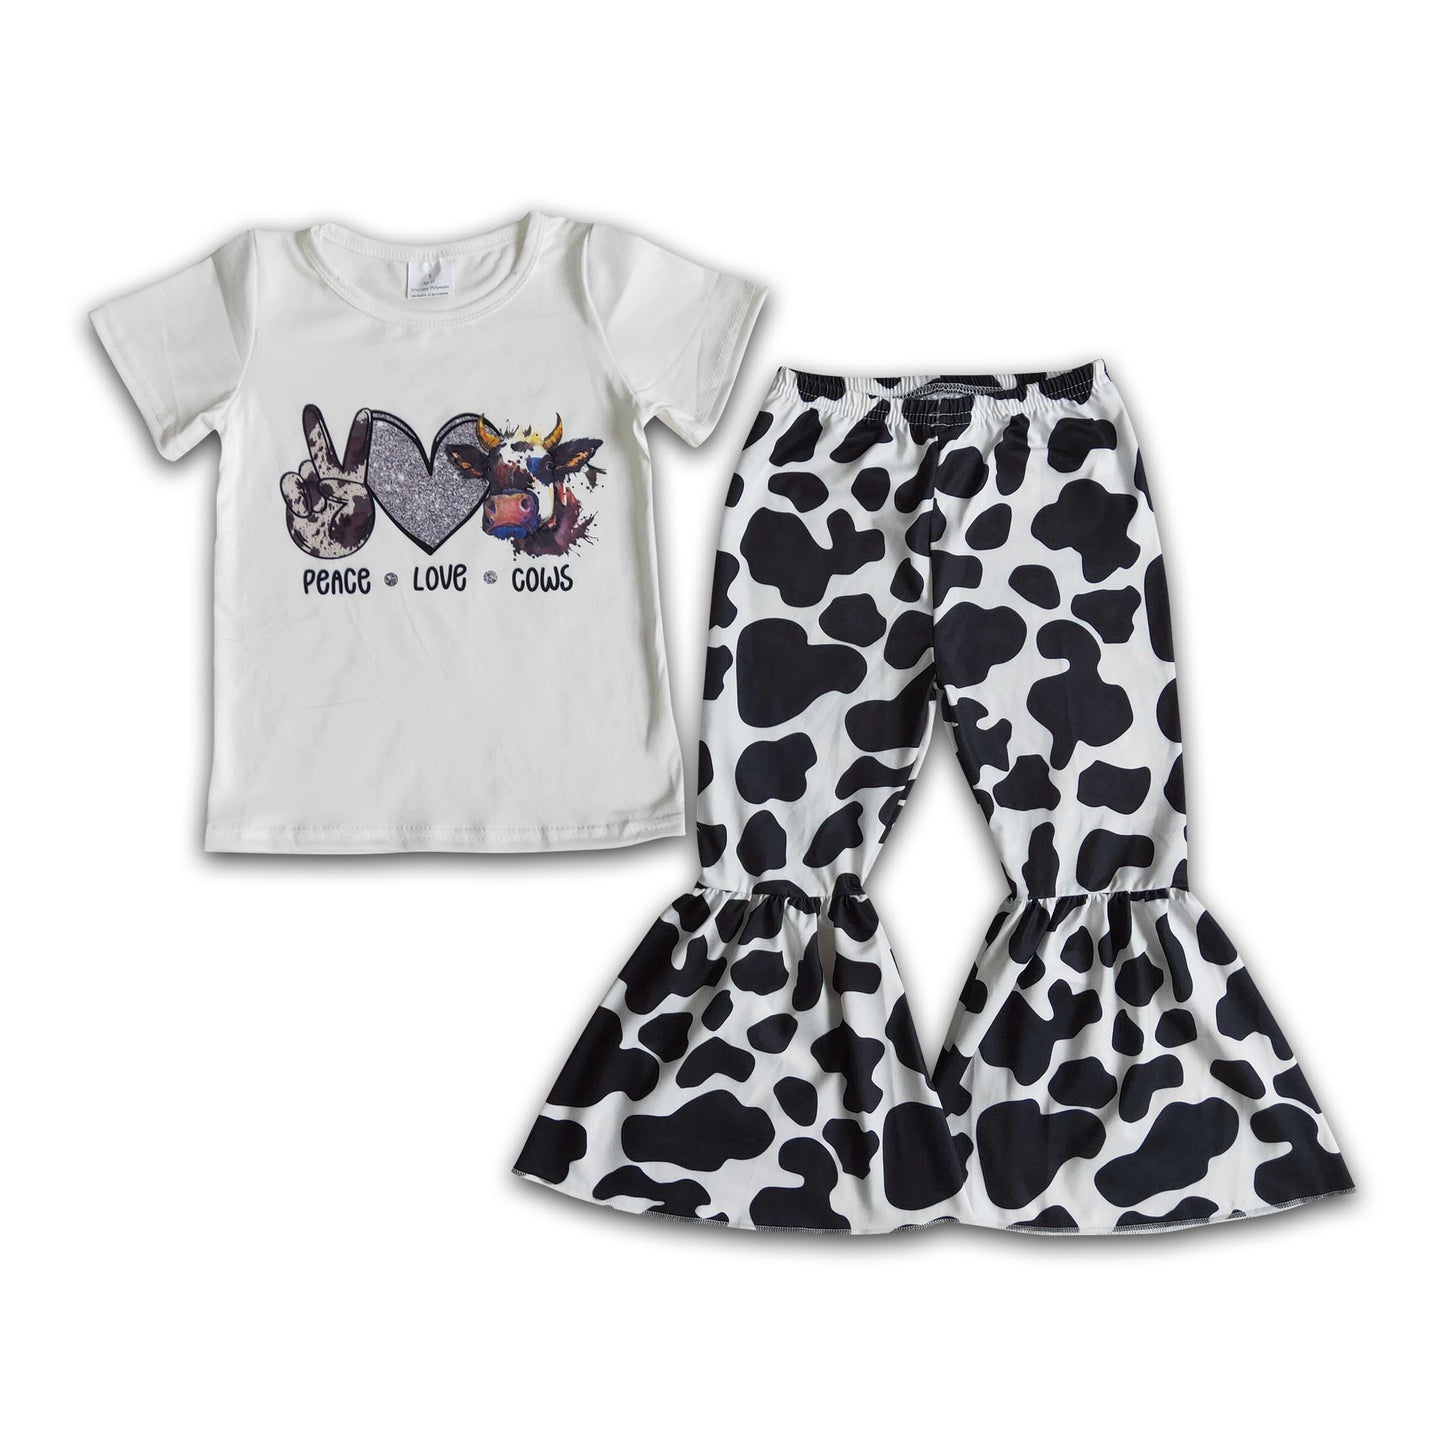 Peace love cows white shirt bell bottom pants girls children outfits